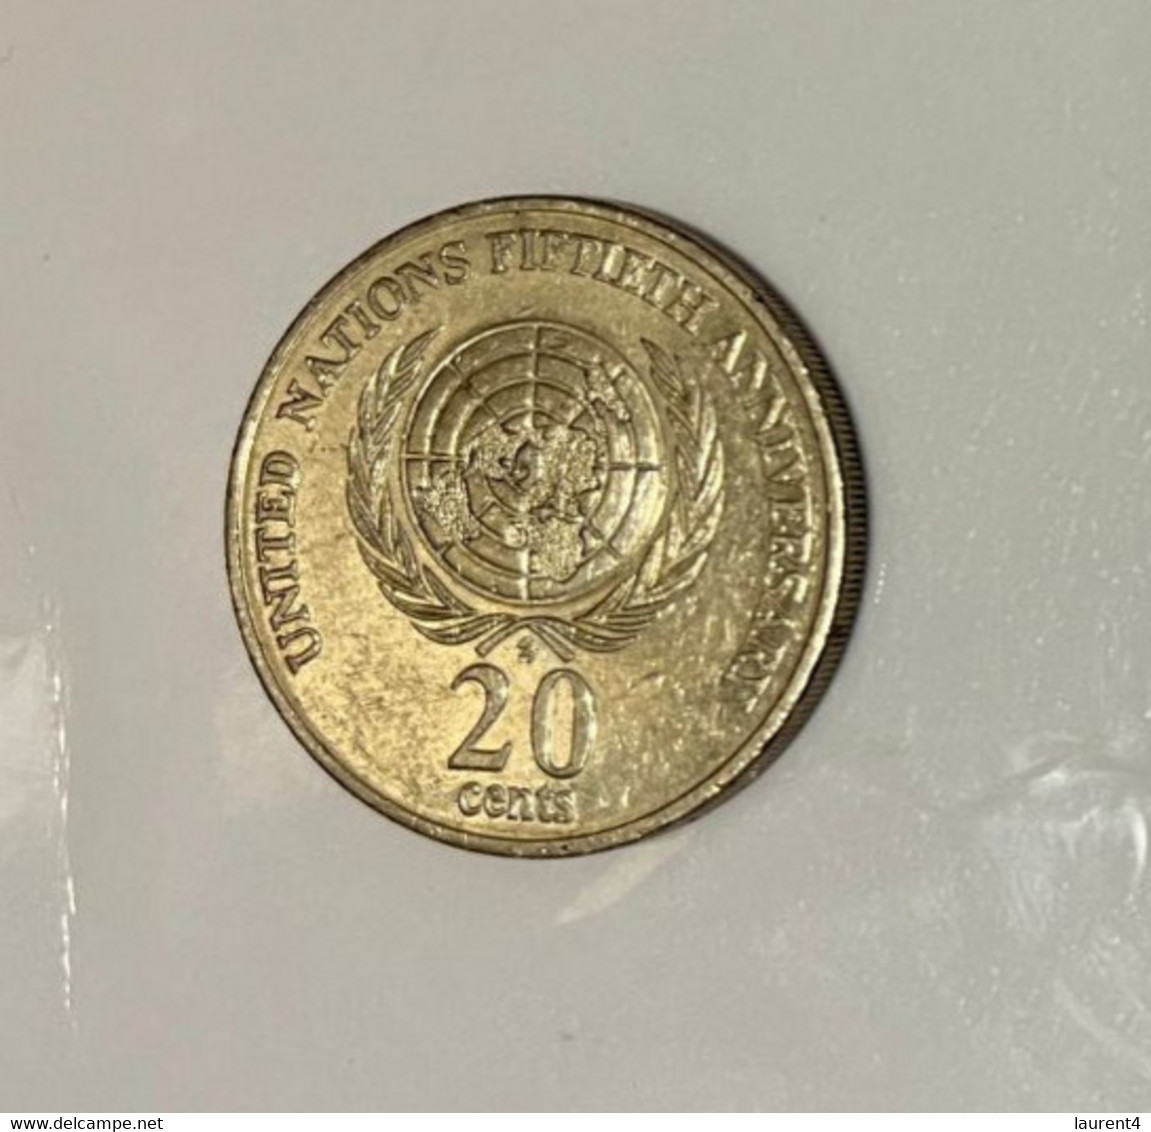 (1 K 45) Australia "collector Limited Edition" Coin - United Nations 50th Nniversary - 20 Cents Coin - Issued In 1995 - 20 Cents